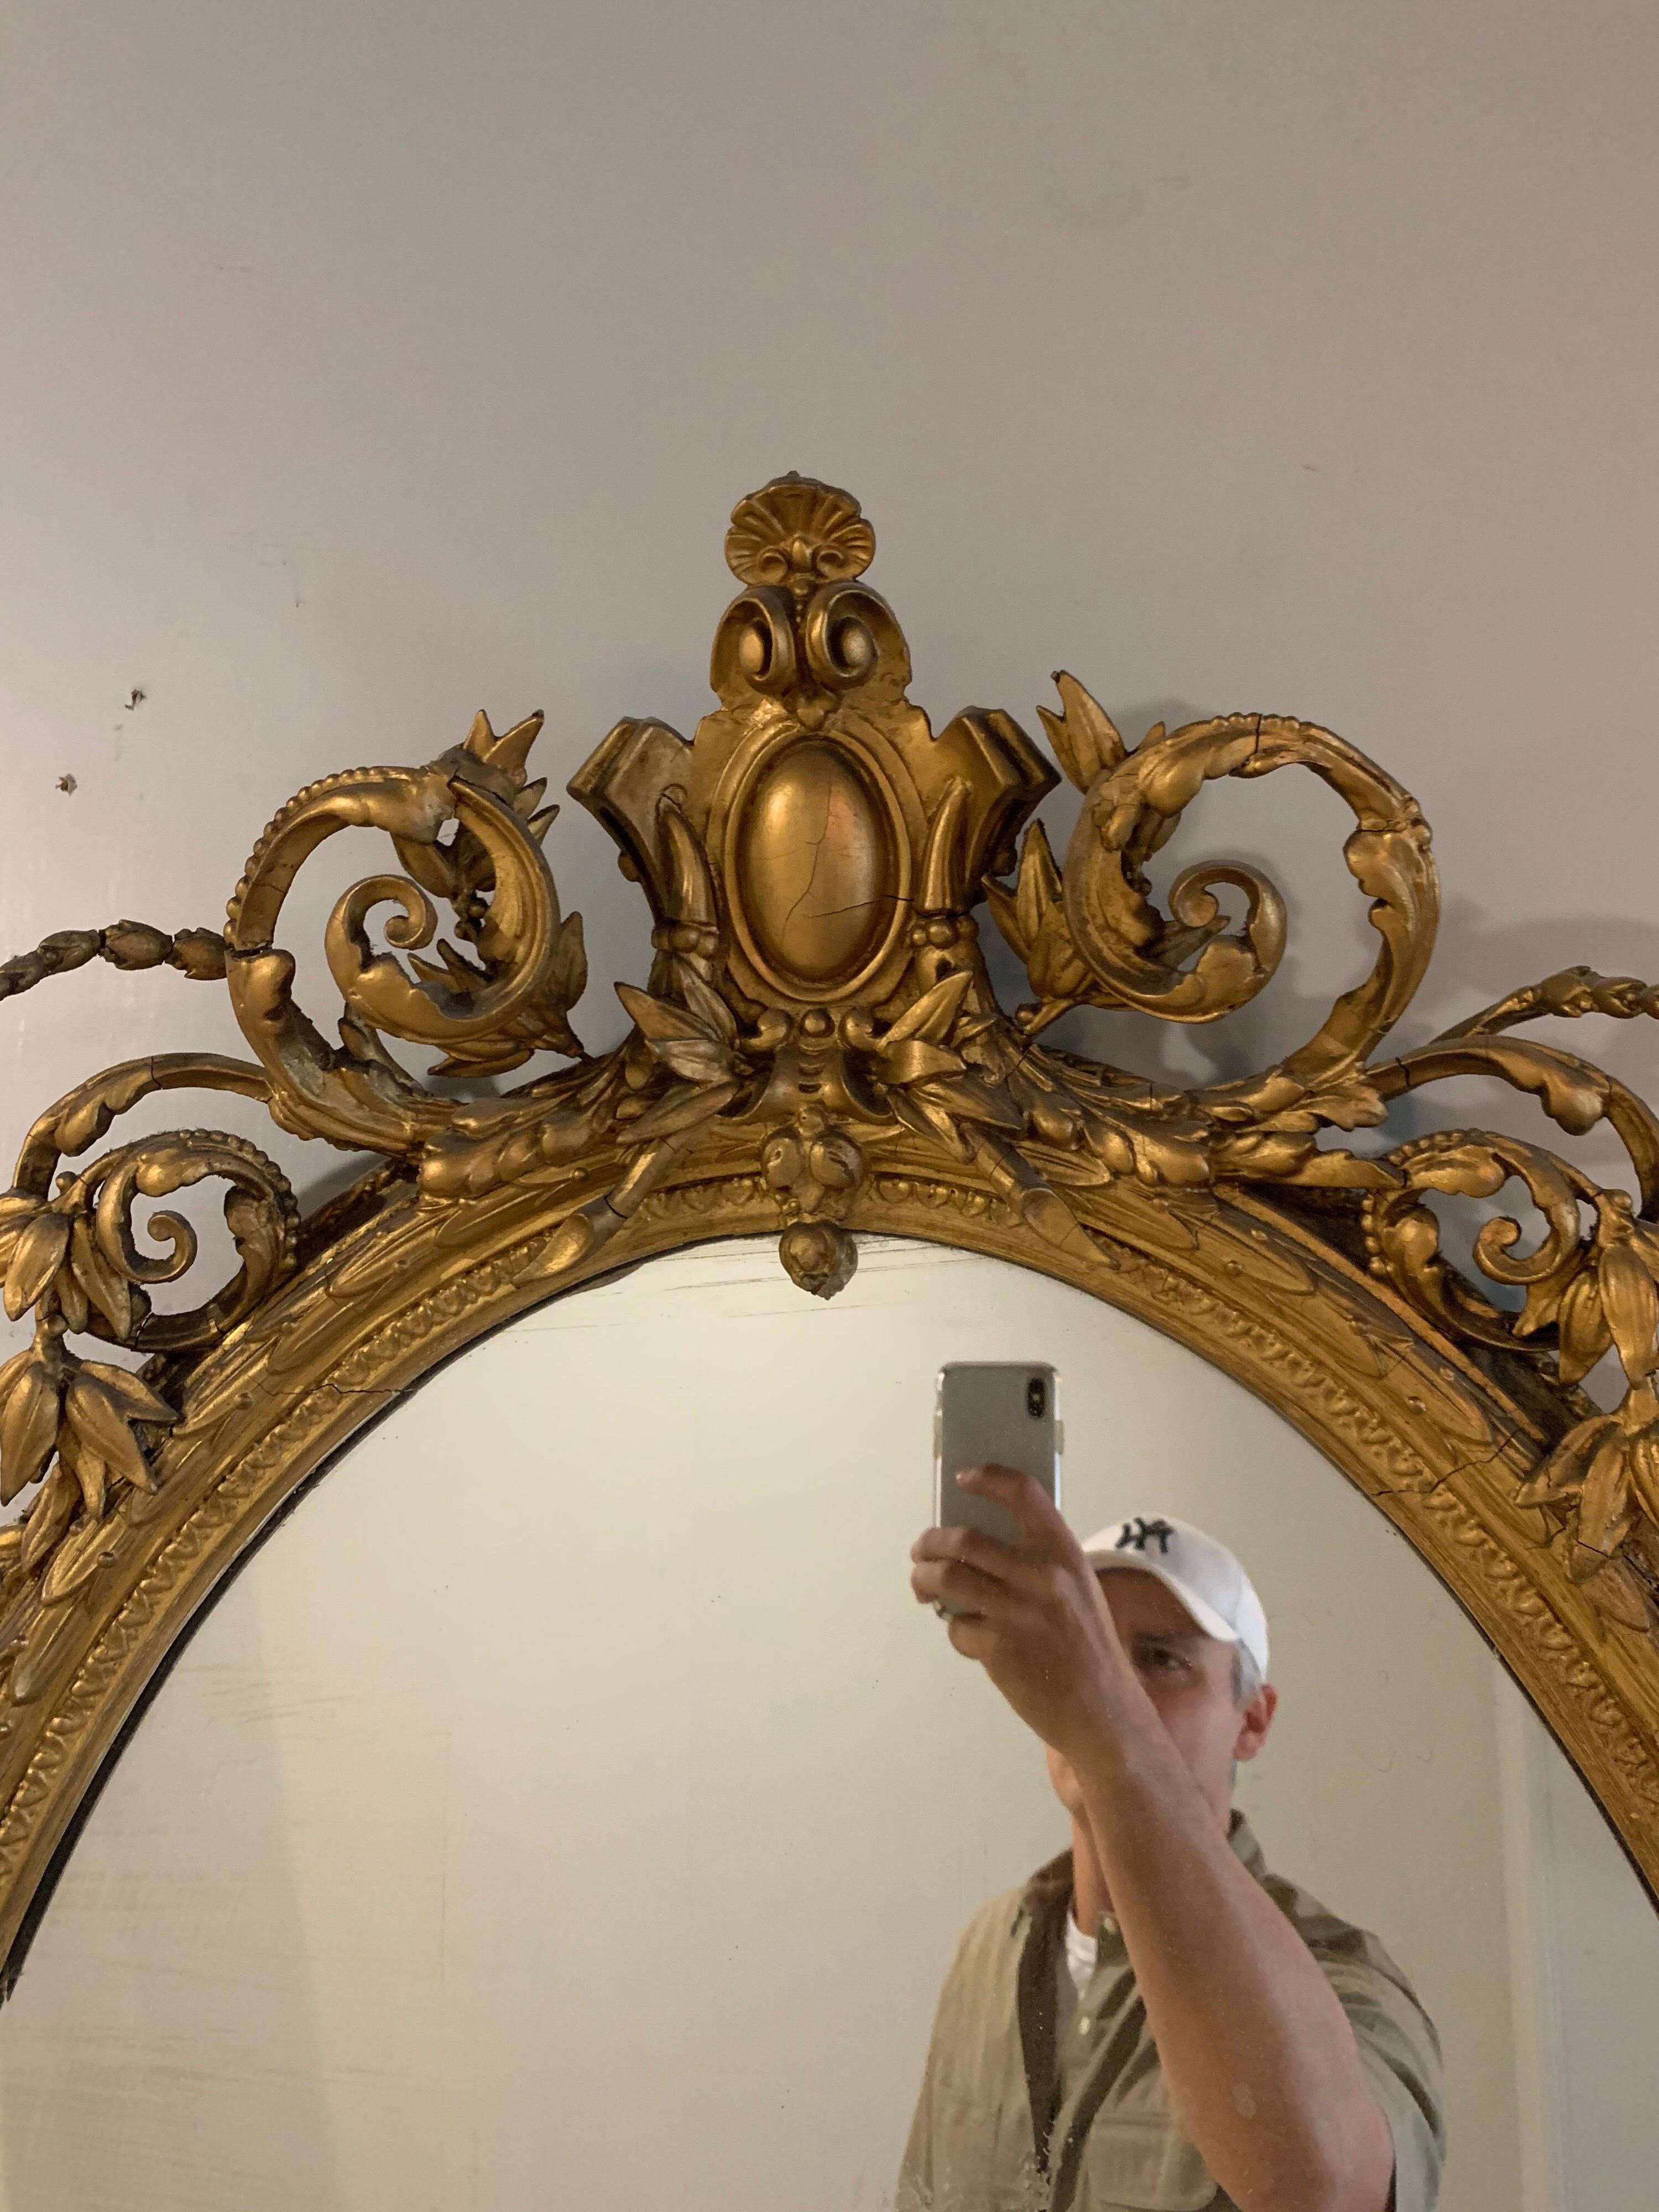 Lovely 19th century French giltwood oval mirror with beautiful carvings. This piece has a 3-arm sconce on the lower part of the mirror. Very unique!